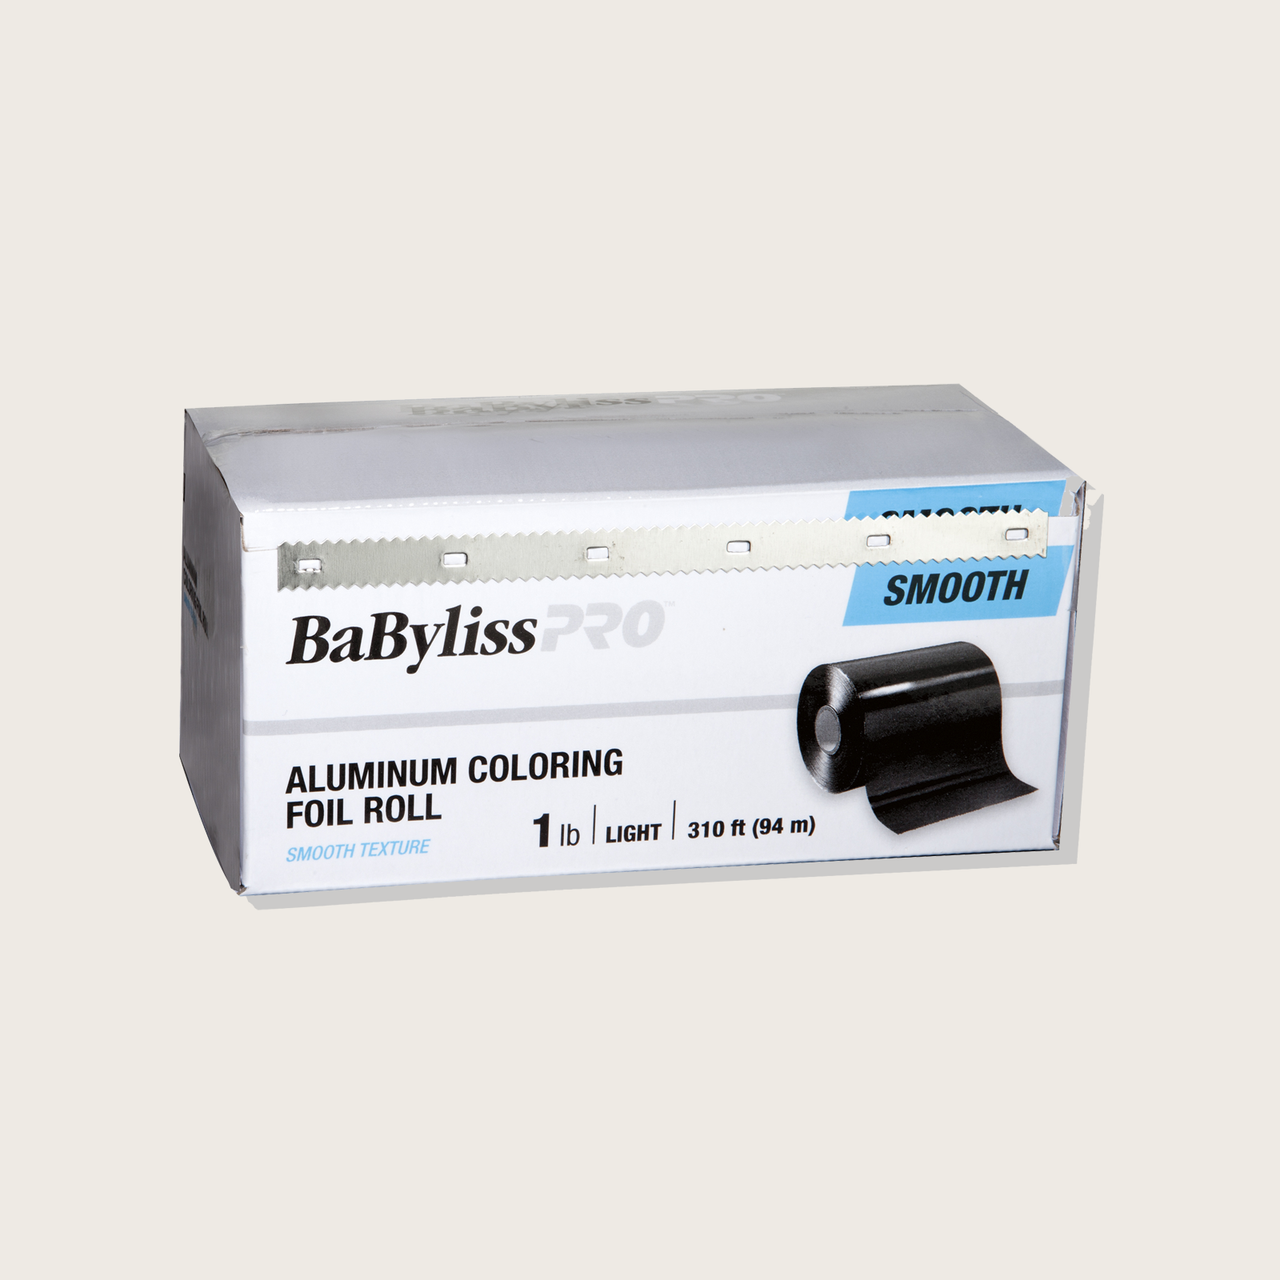 Babylisspro Black aluminum coloring foil roll smooth 1 lb #BESFOILLKUCC 